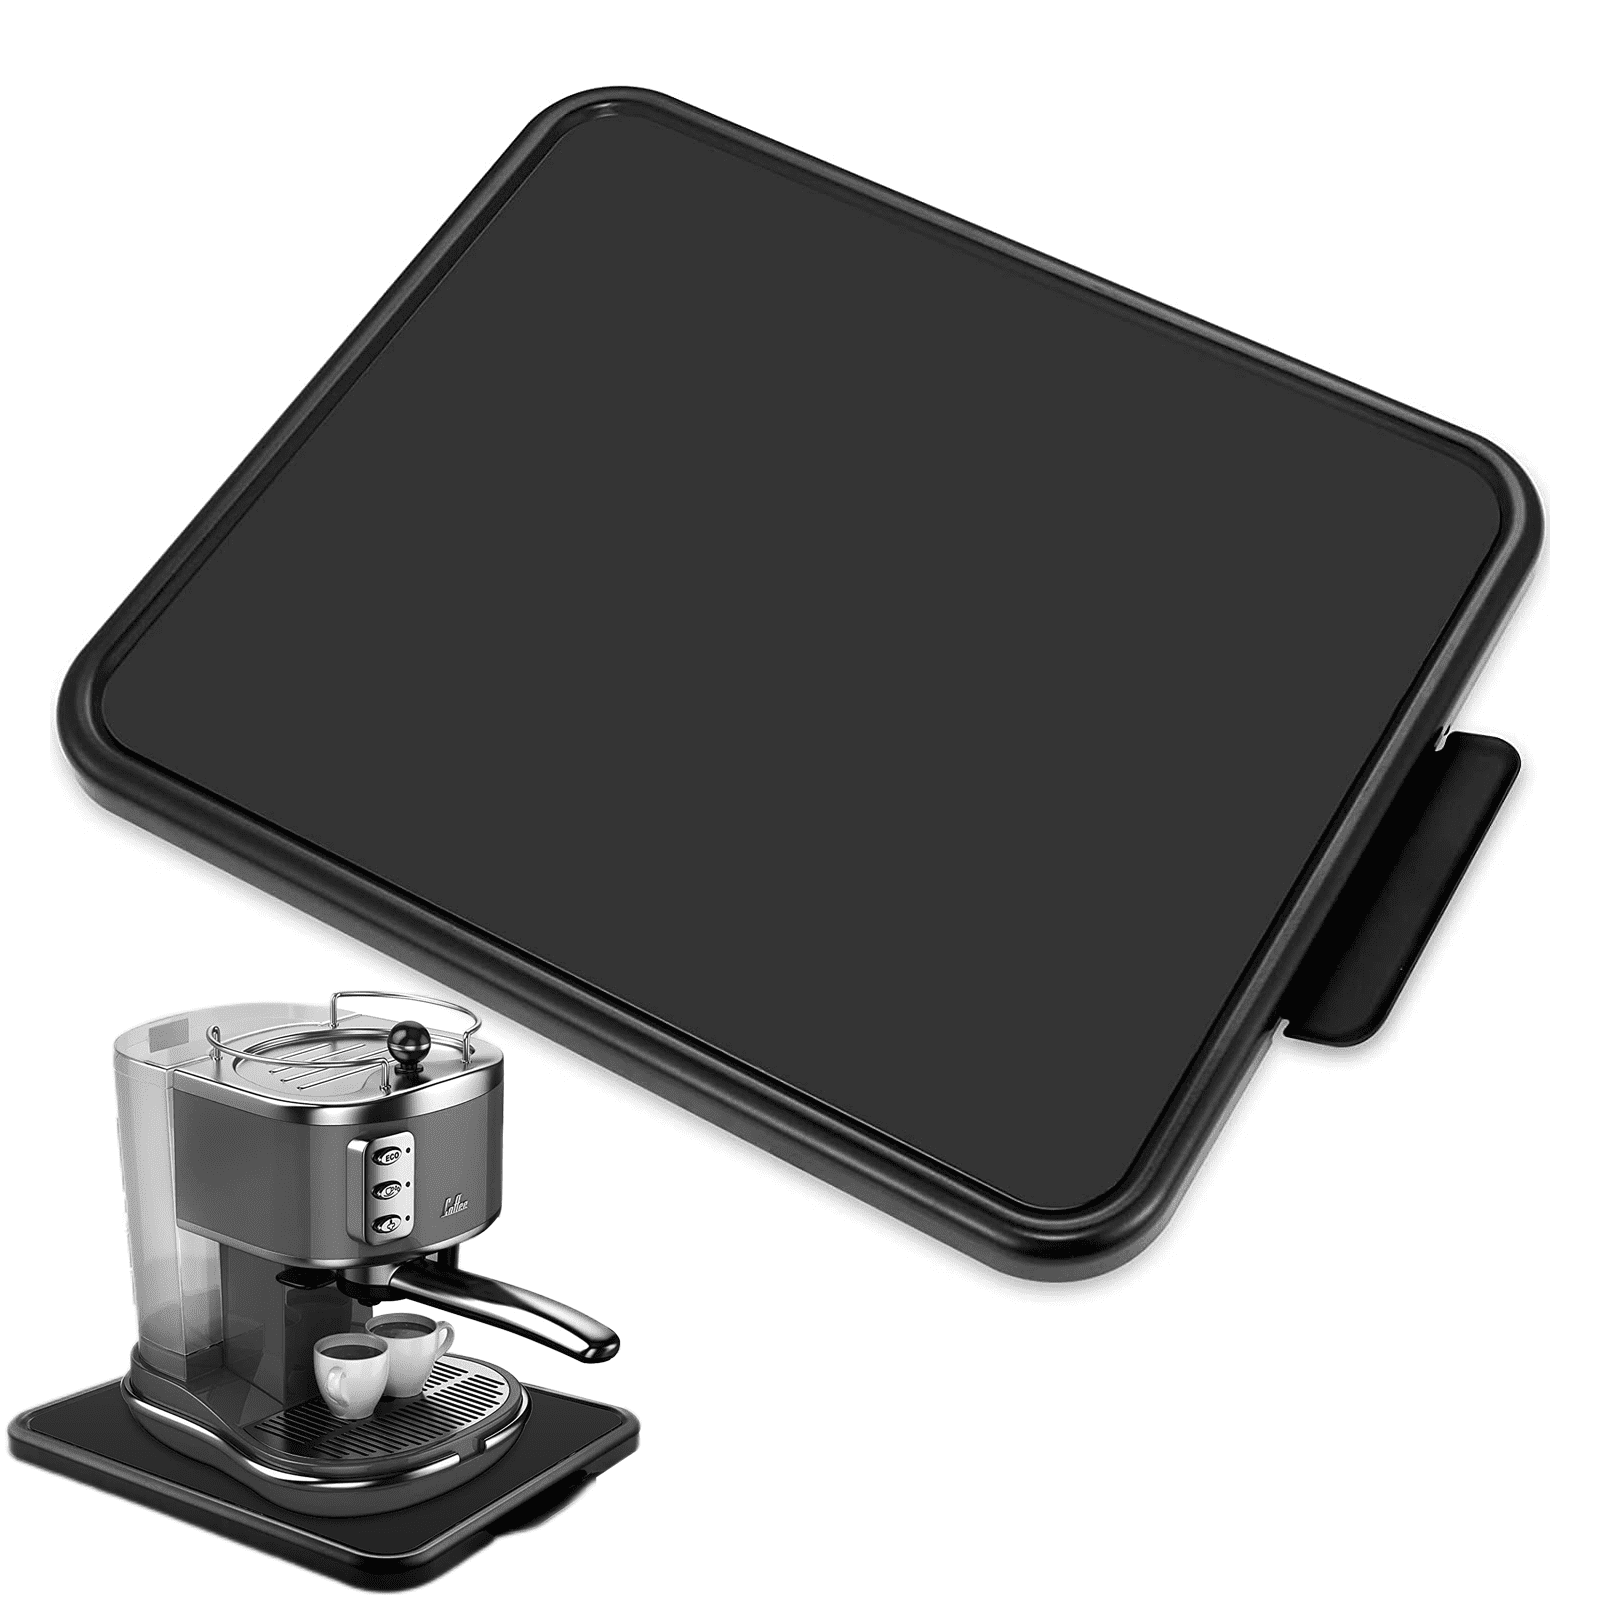 Nifty Medium Appliance Rolling Tray – Black, Home Kitchen Counter  Organizer, Integrated Rolling System, Non-Slip Pad Top for Coffee Maker,  Stand